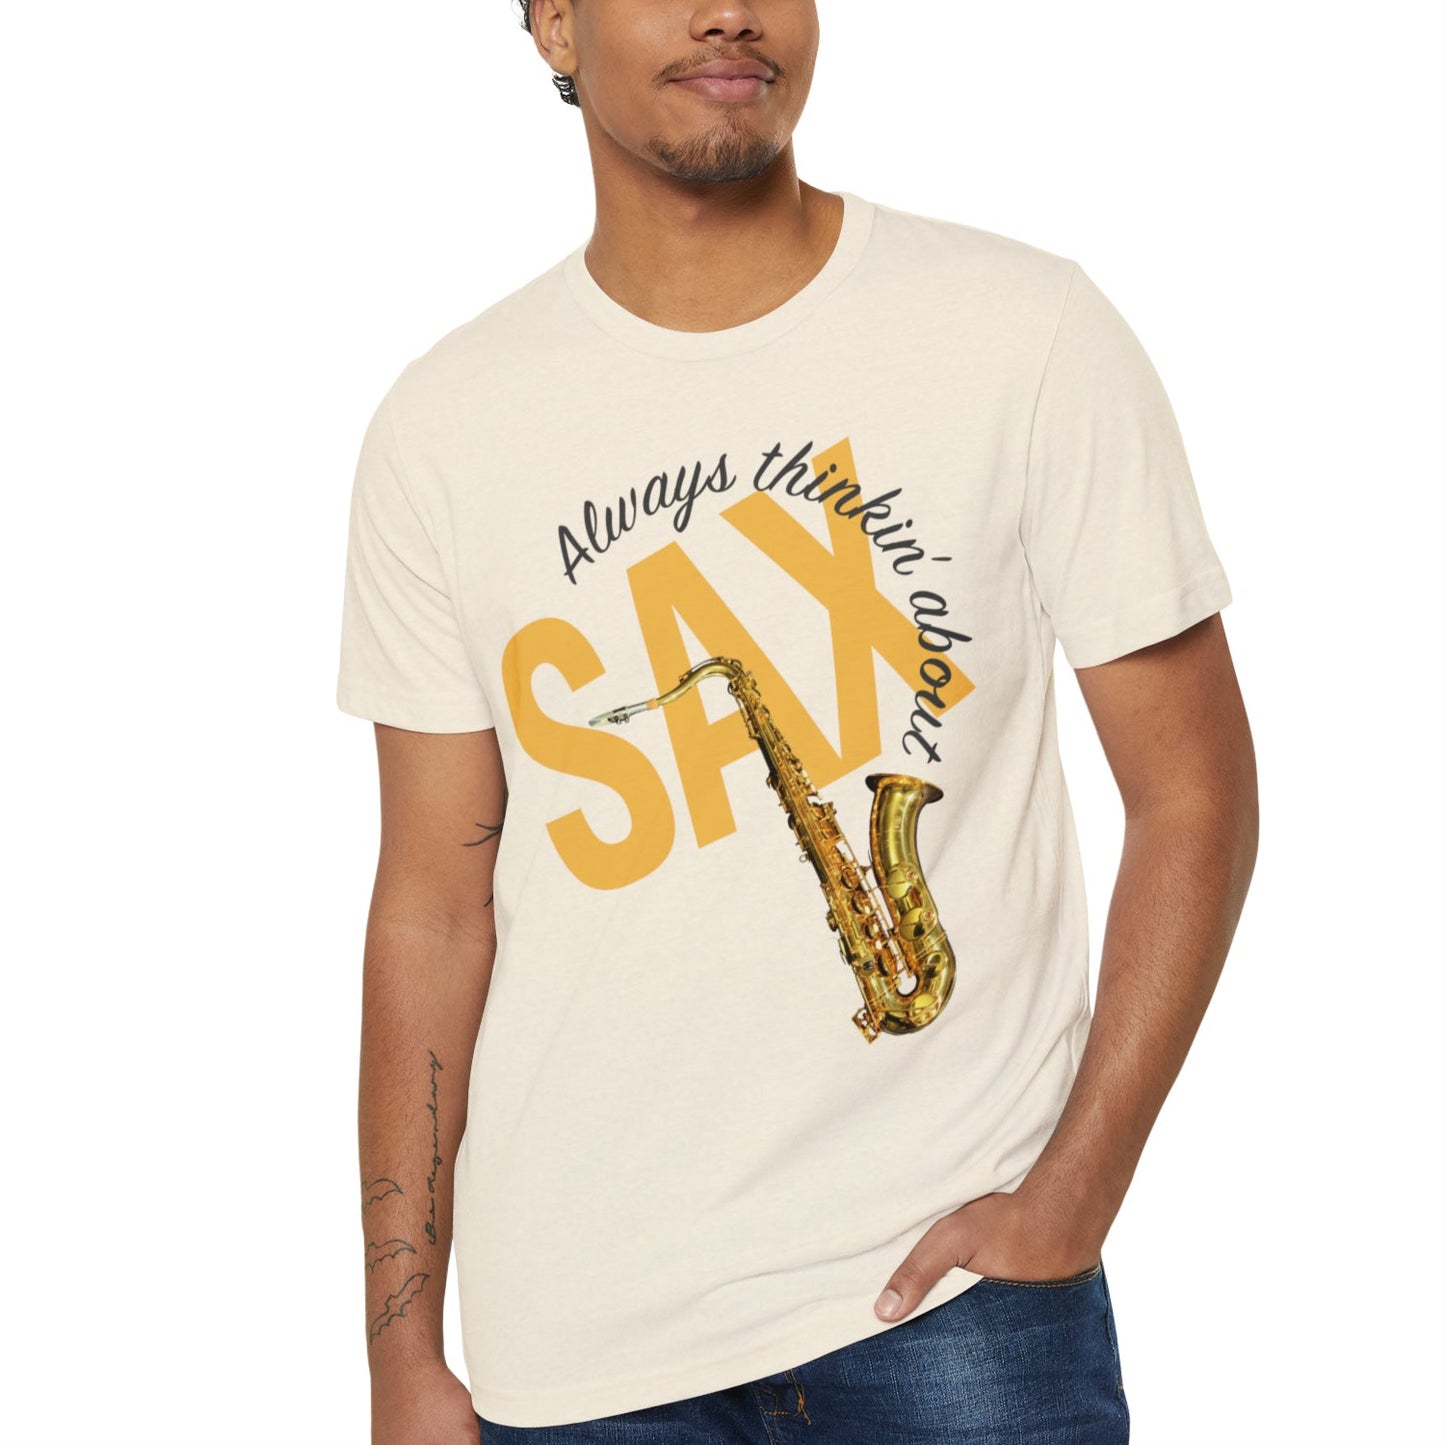 Always Thinkin' About SAX - saxophone, Recycled Organic Bella+Canvas 3001 T-Shirt, multiple shirt colors, solid & heather textures